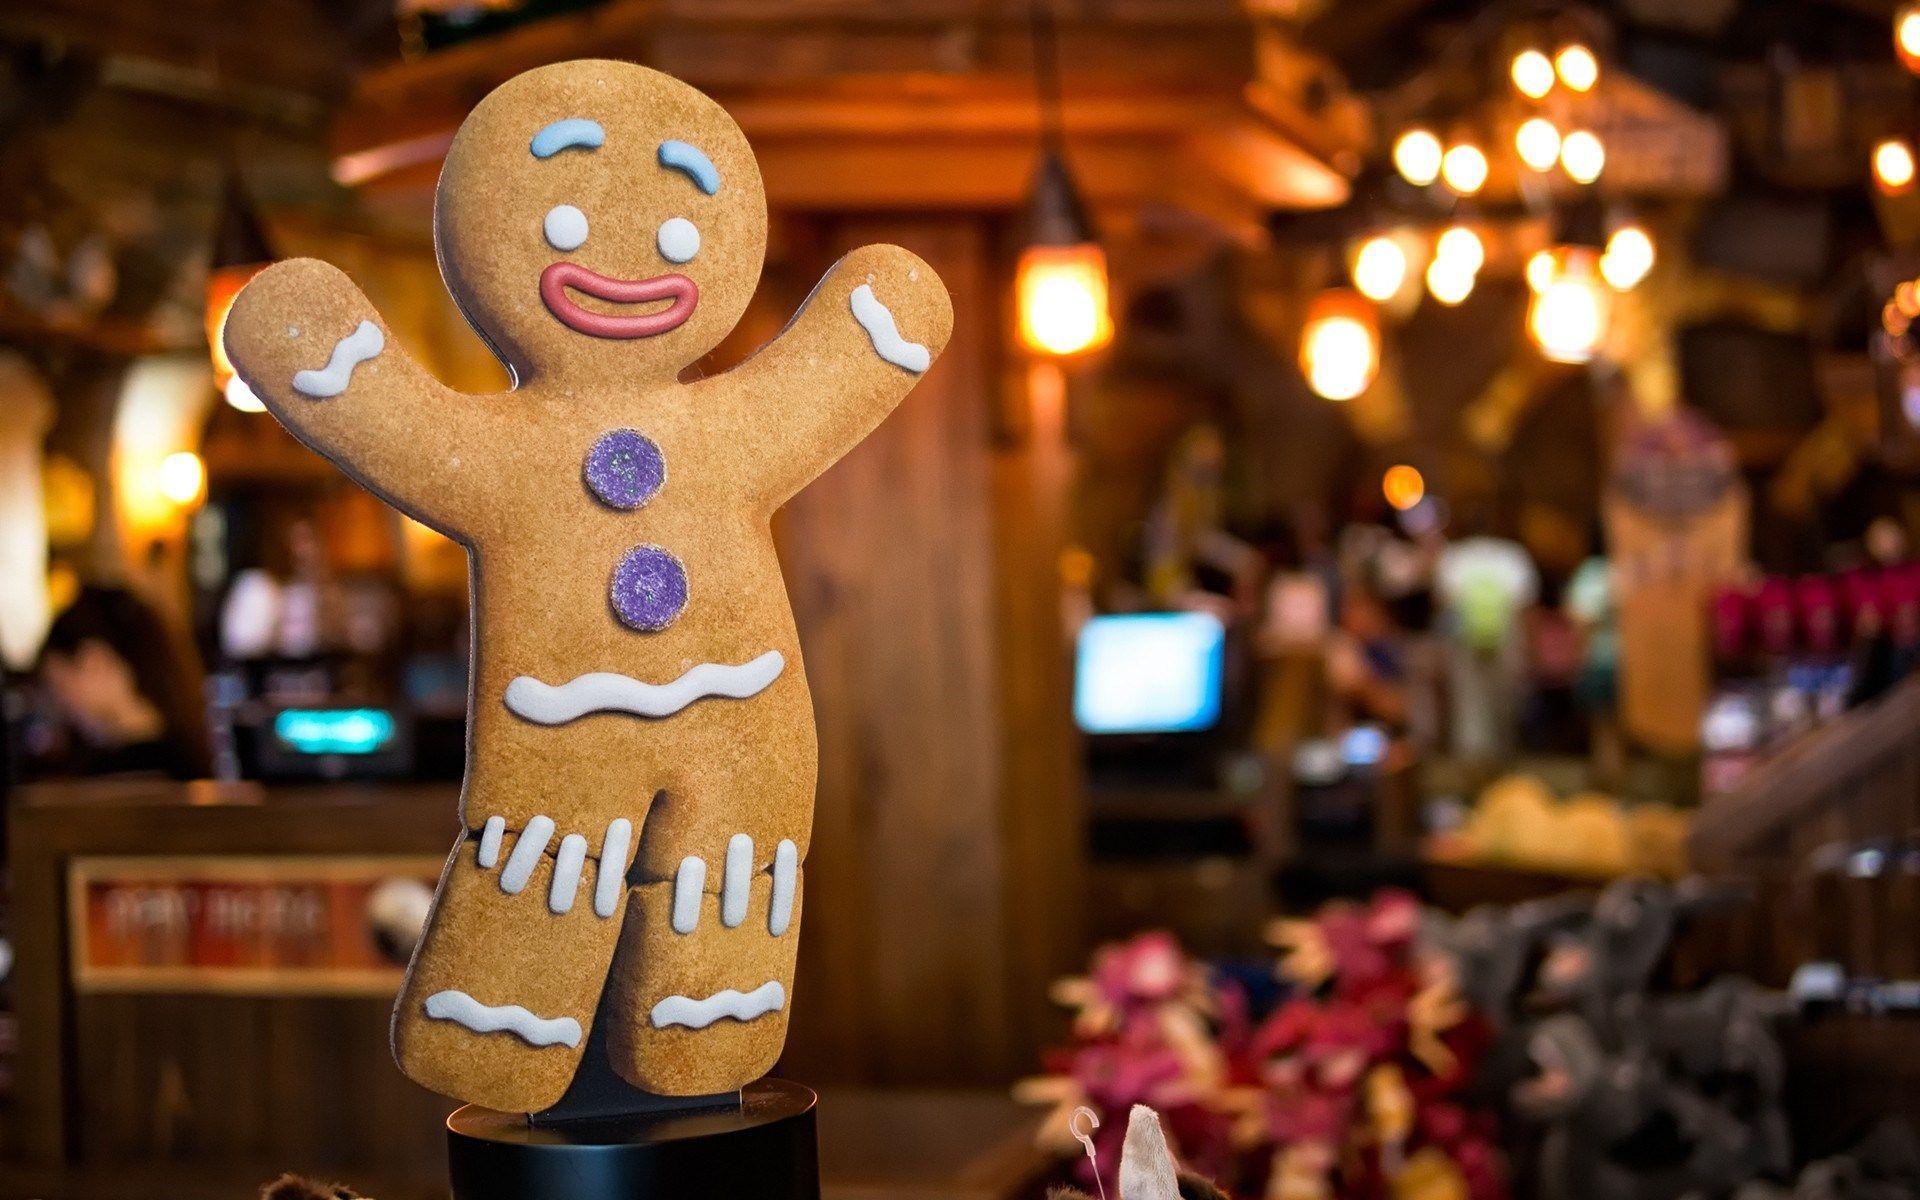 Gingerbread Man wallpapers, Festive delight, Holiday cheer, Whimsical character, 1920x1200 HD Desktop